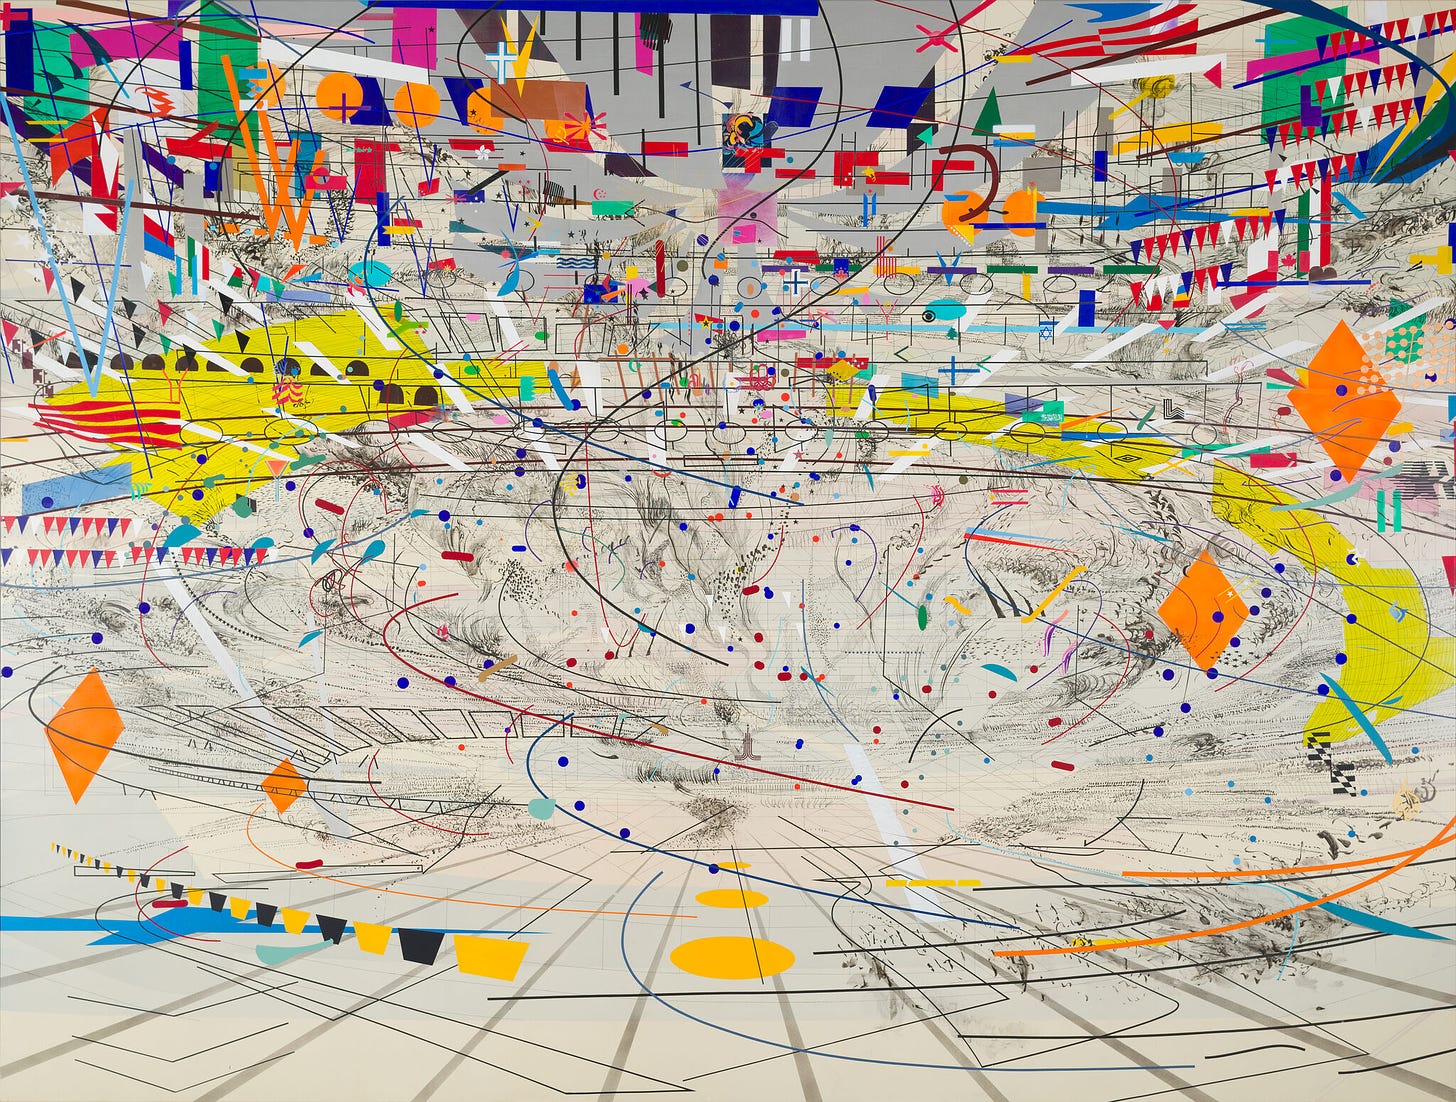 Julie Mehretu, Stadia II, 2004. Ink and acrylic on canvas, 107 3/8 × 140 1/8 in. (272.73 × 355.92 cm). Carnegie Museum of Art, Pittsburg; gift of Jeanne Greenberg Rohatyn and Nicolas Rohatyn and A.W. Mellon Acquisition Endowment Fund 2004.50. Photograph courtesy the Carnegie Museum. © Julie Mehretu